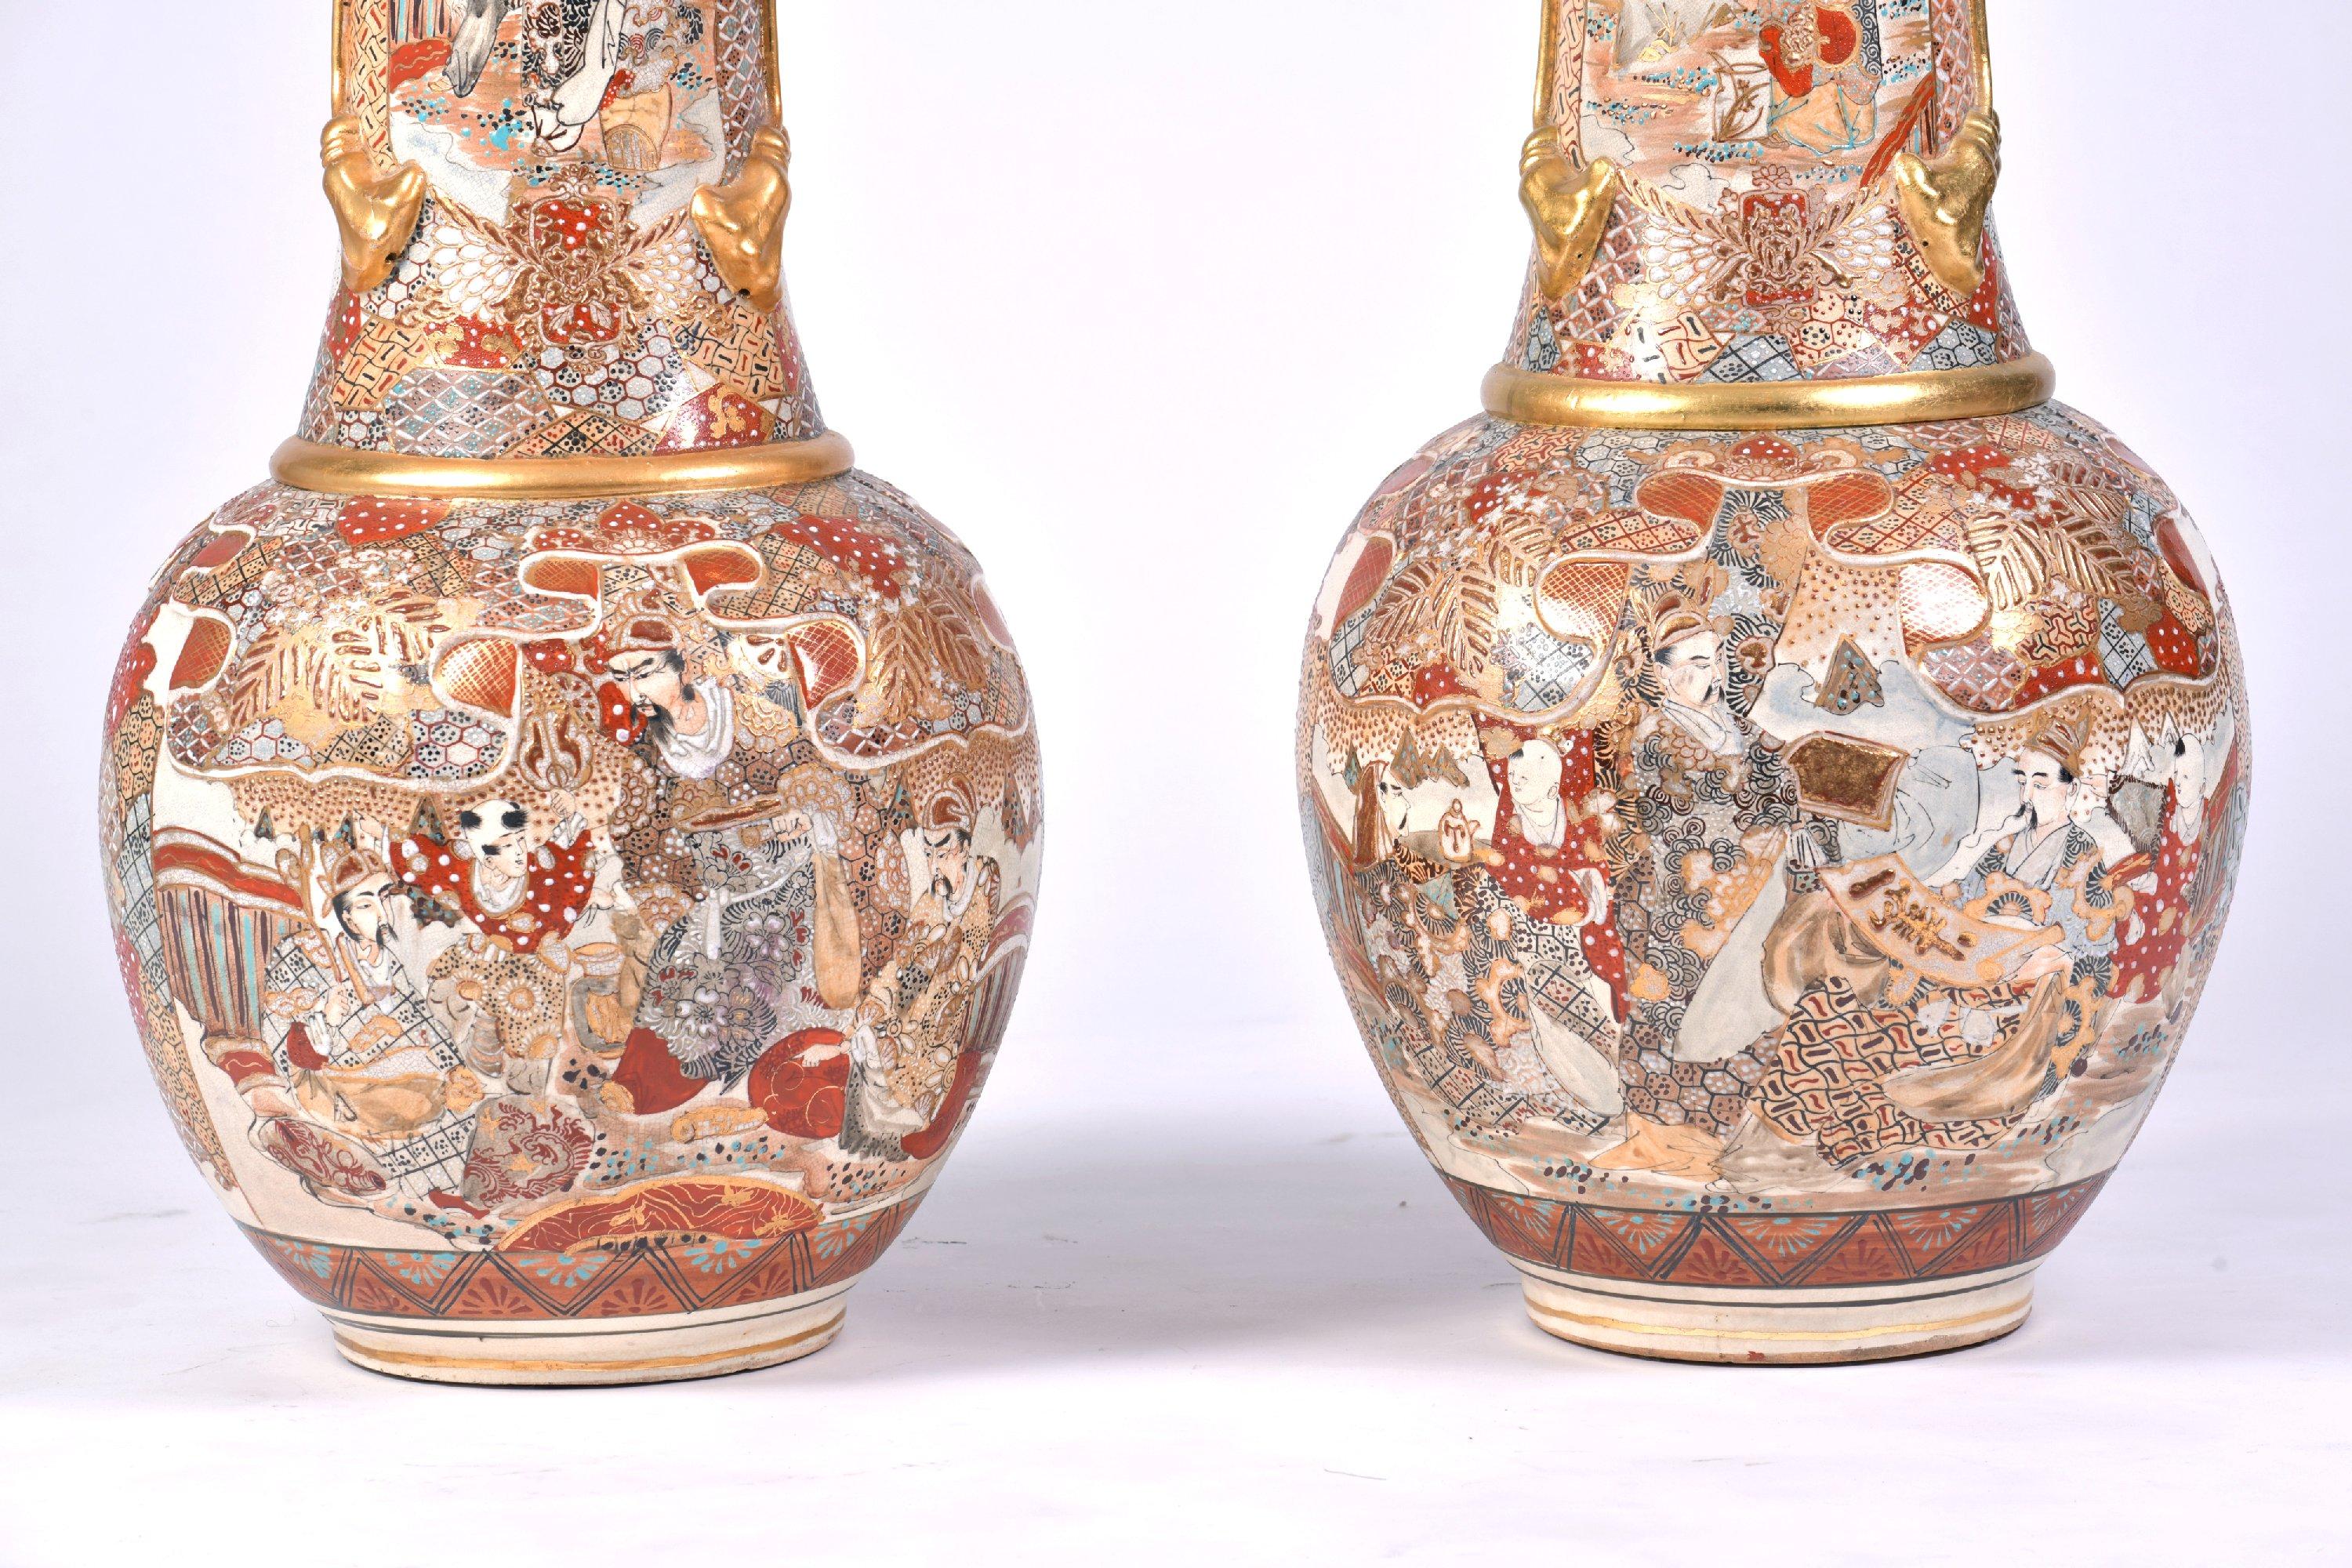 These striking and beautifully designed 19th century Japanese over-sized vases feature a profuse and intricate design pattern with gold leaf. Each vase measures 14 in-35.6 cm in diameter at the widest point of the base and 37 ½ in-95.2 cm in height.